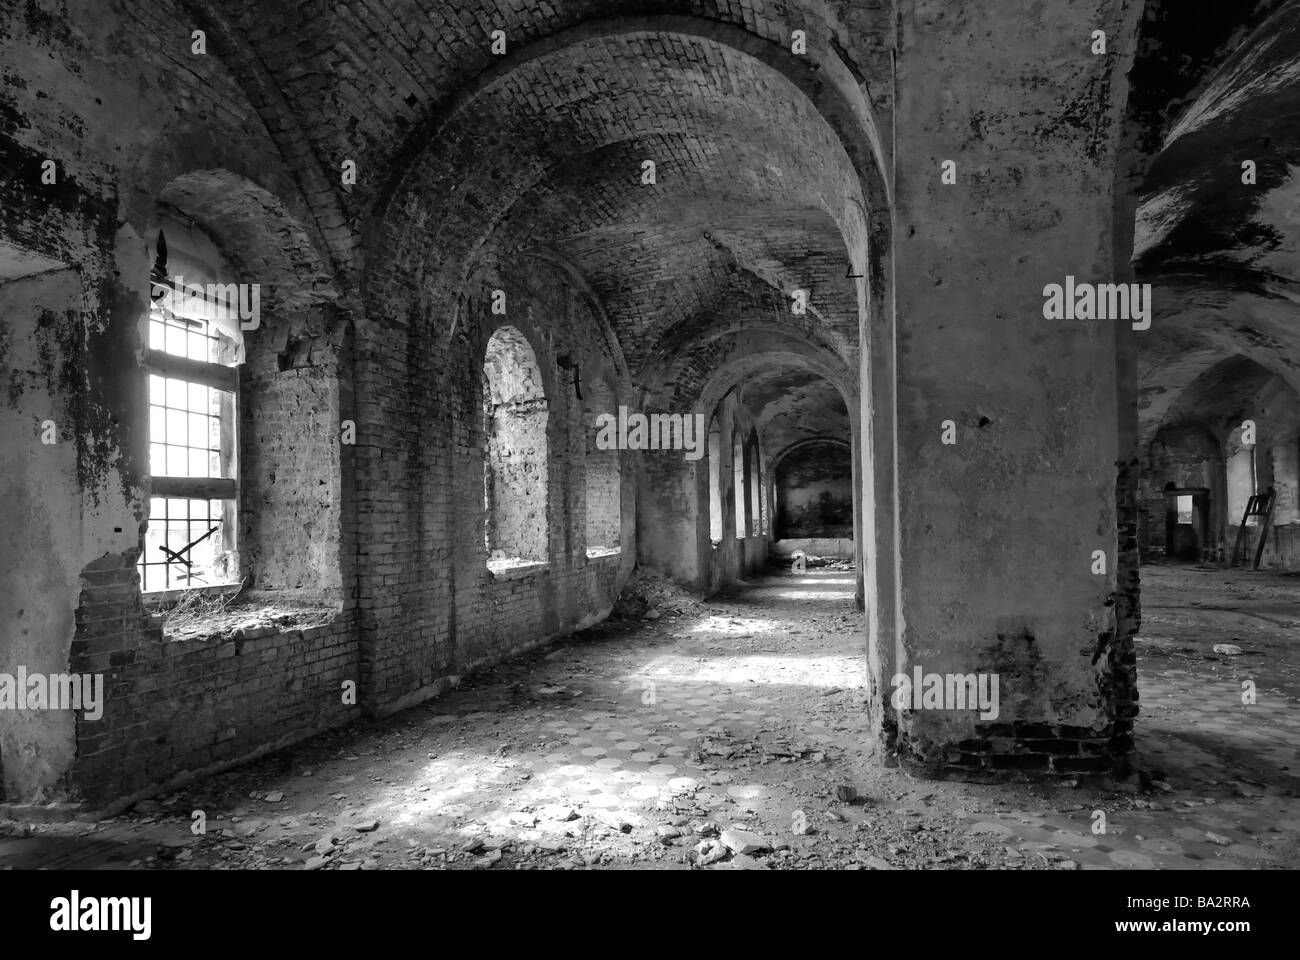 Prayer hall of destroyed during Soviet period Russian country church Vladimir city region Russia Black and White version Stock Photo